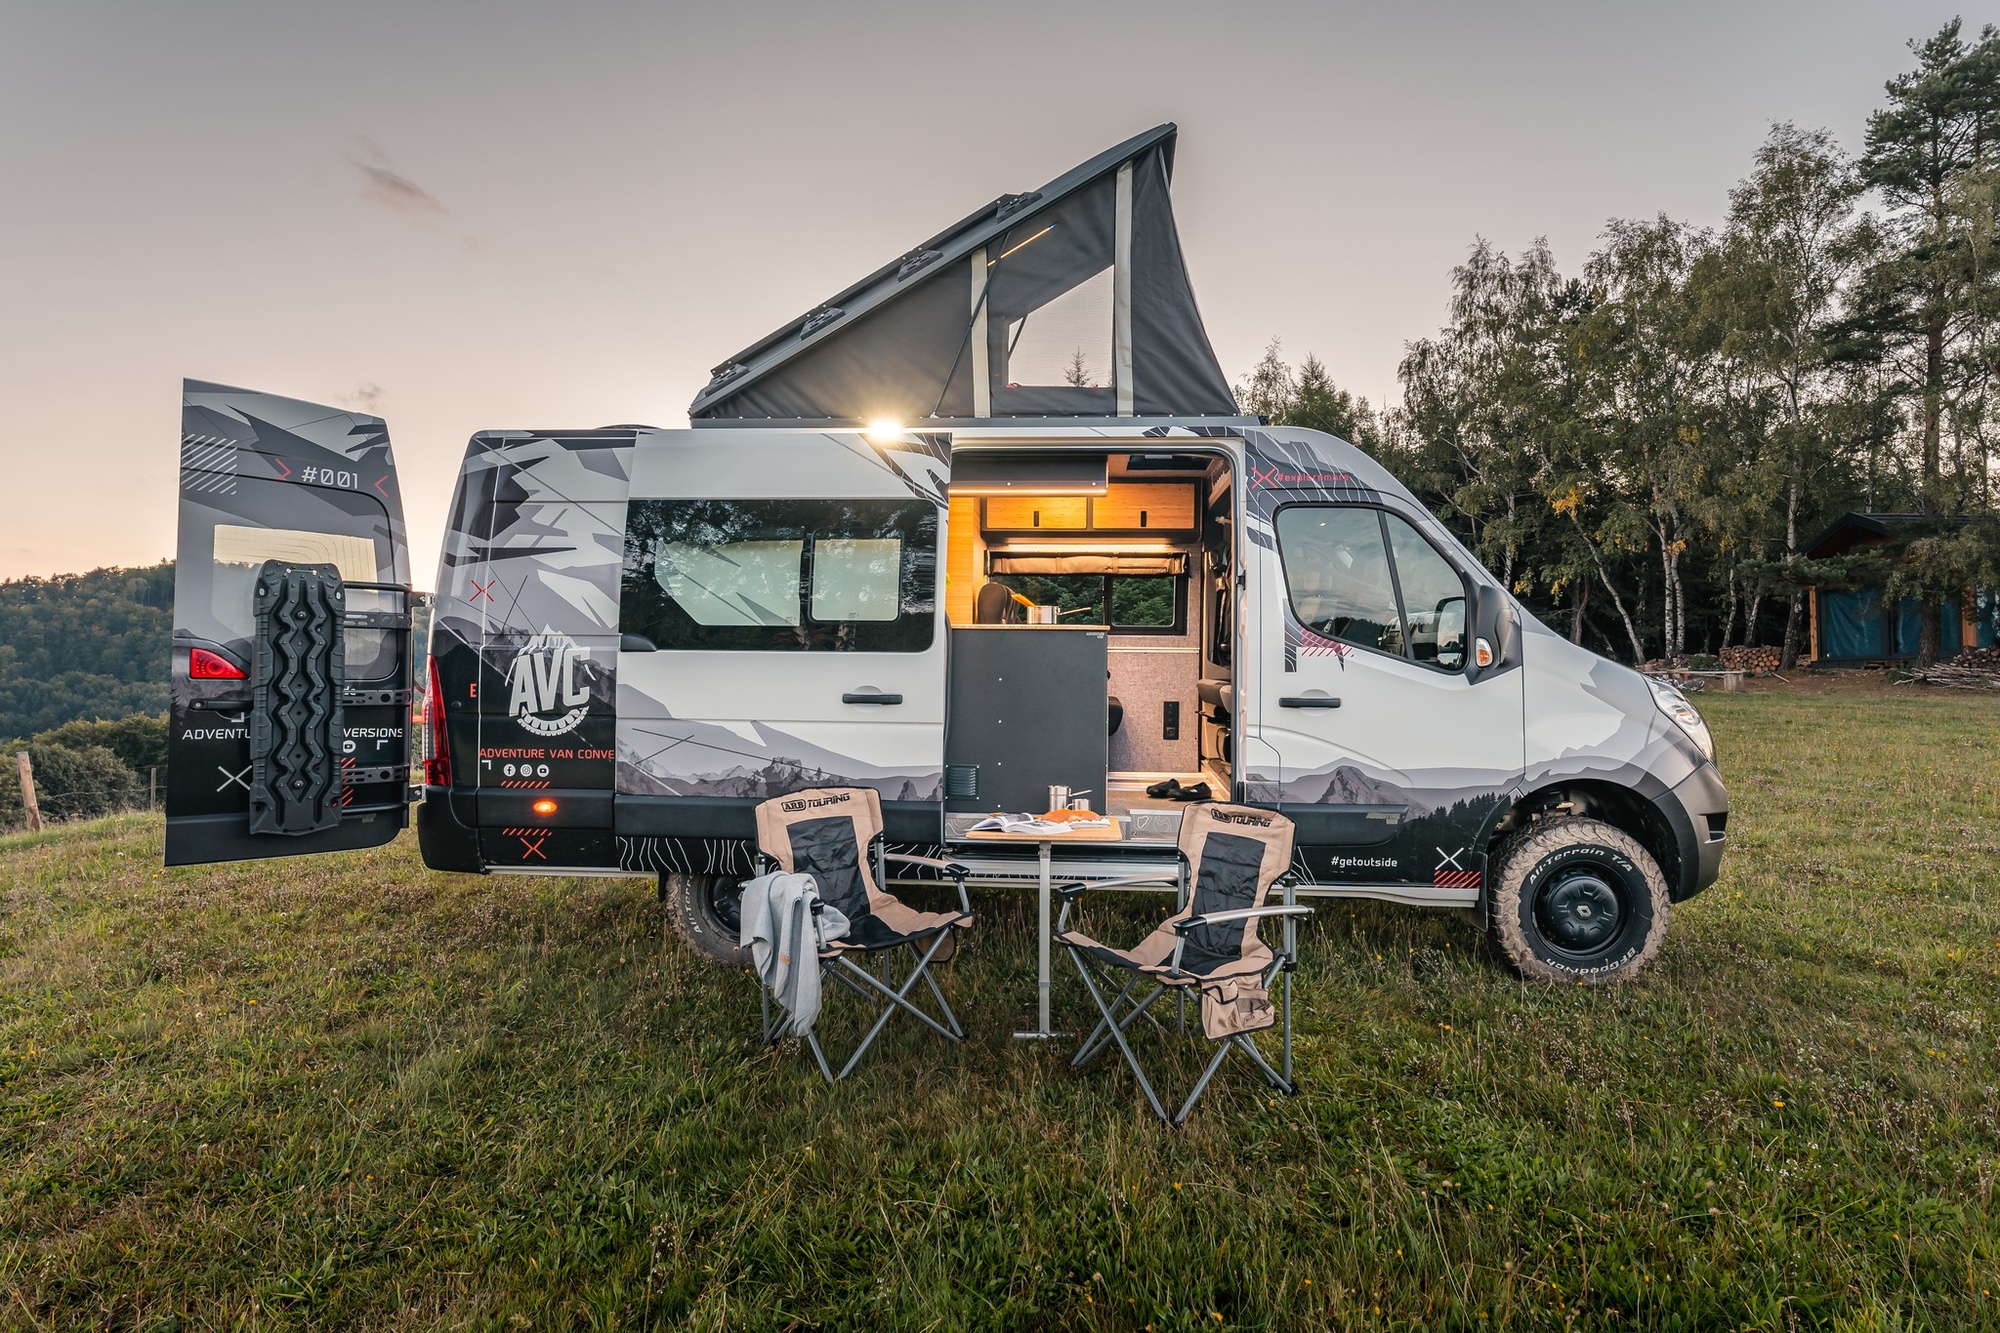 Company Adventure Van Conversions offer – Motorhome producer – image 5